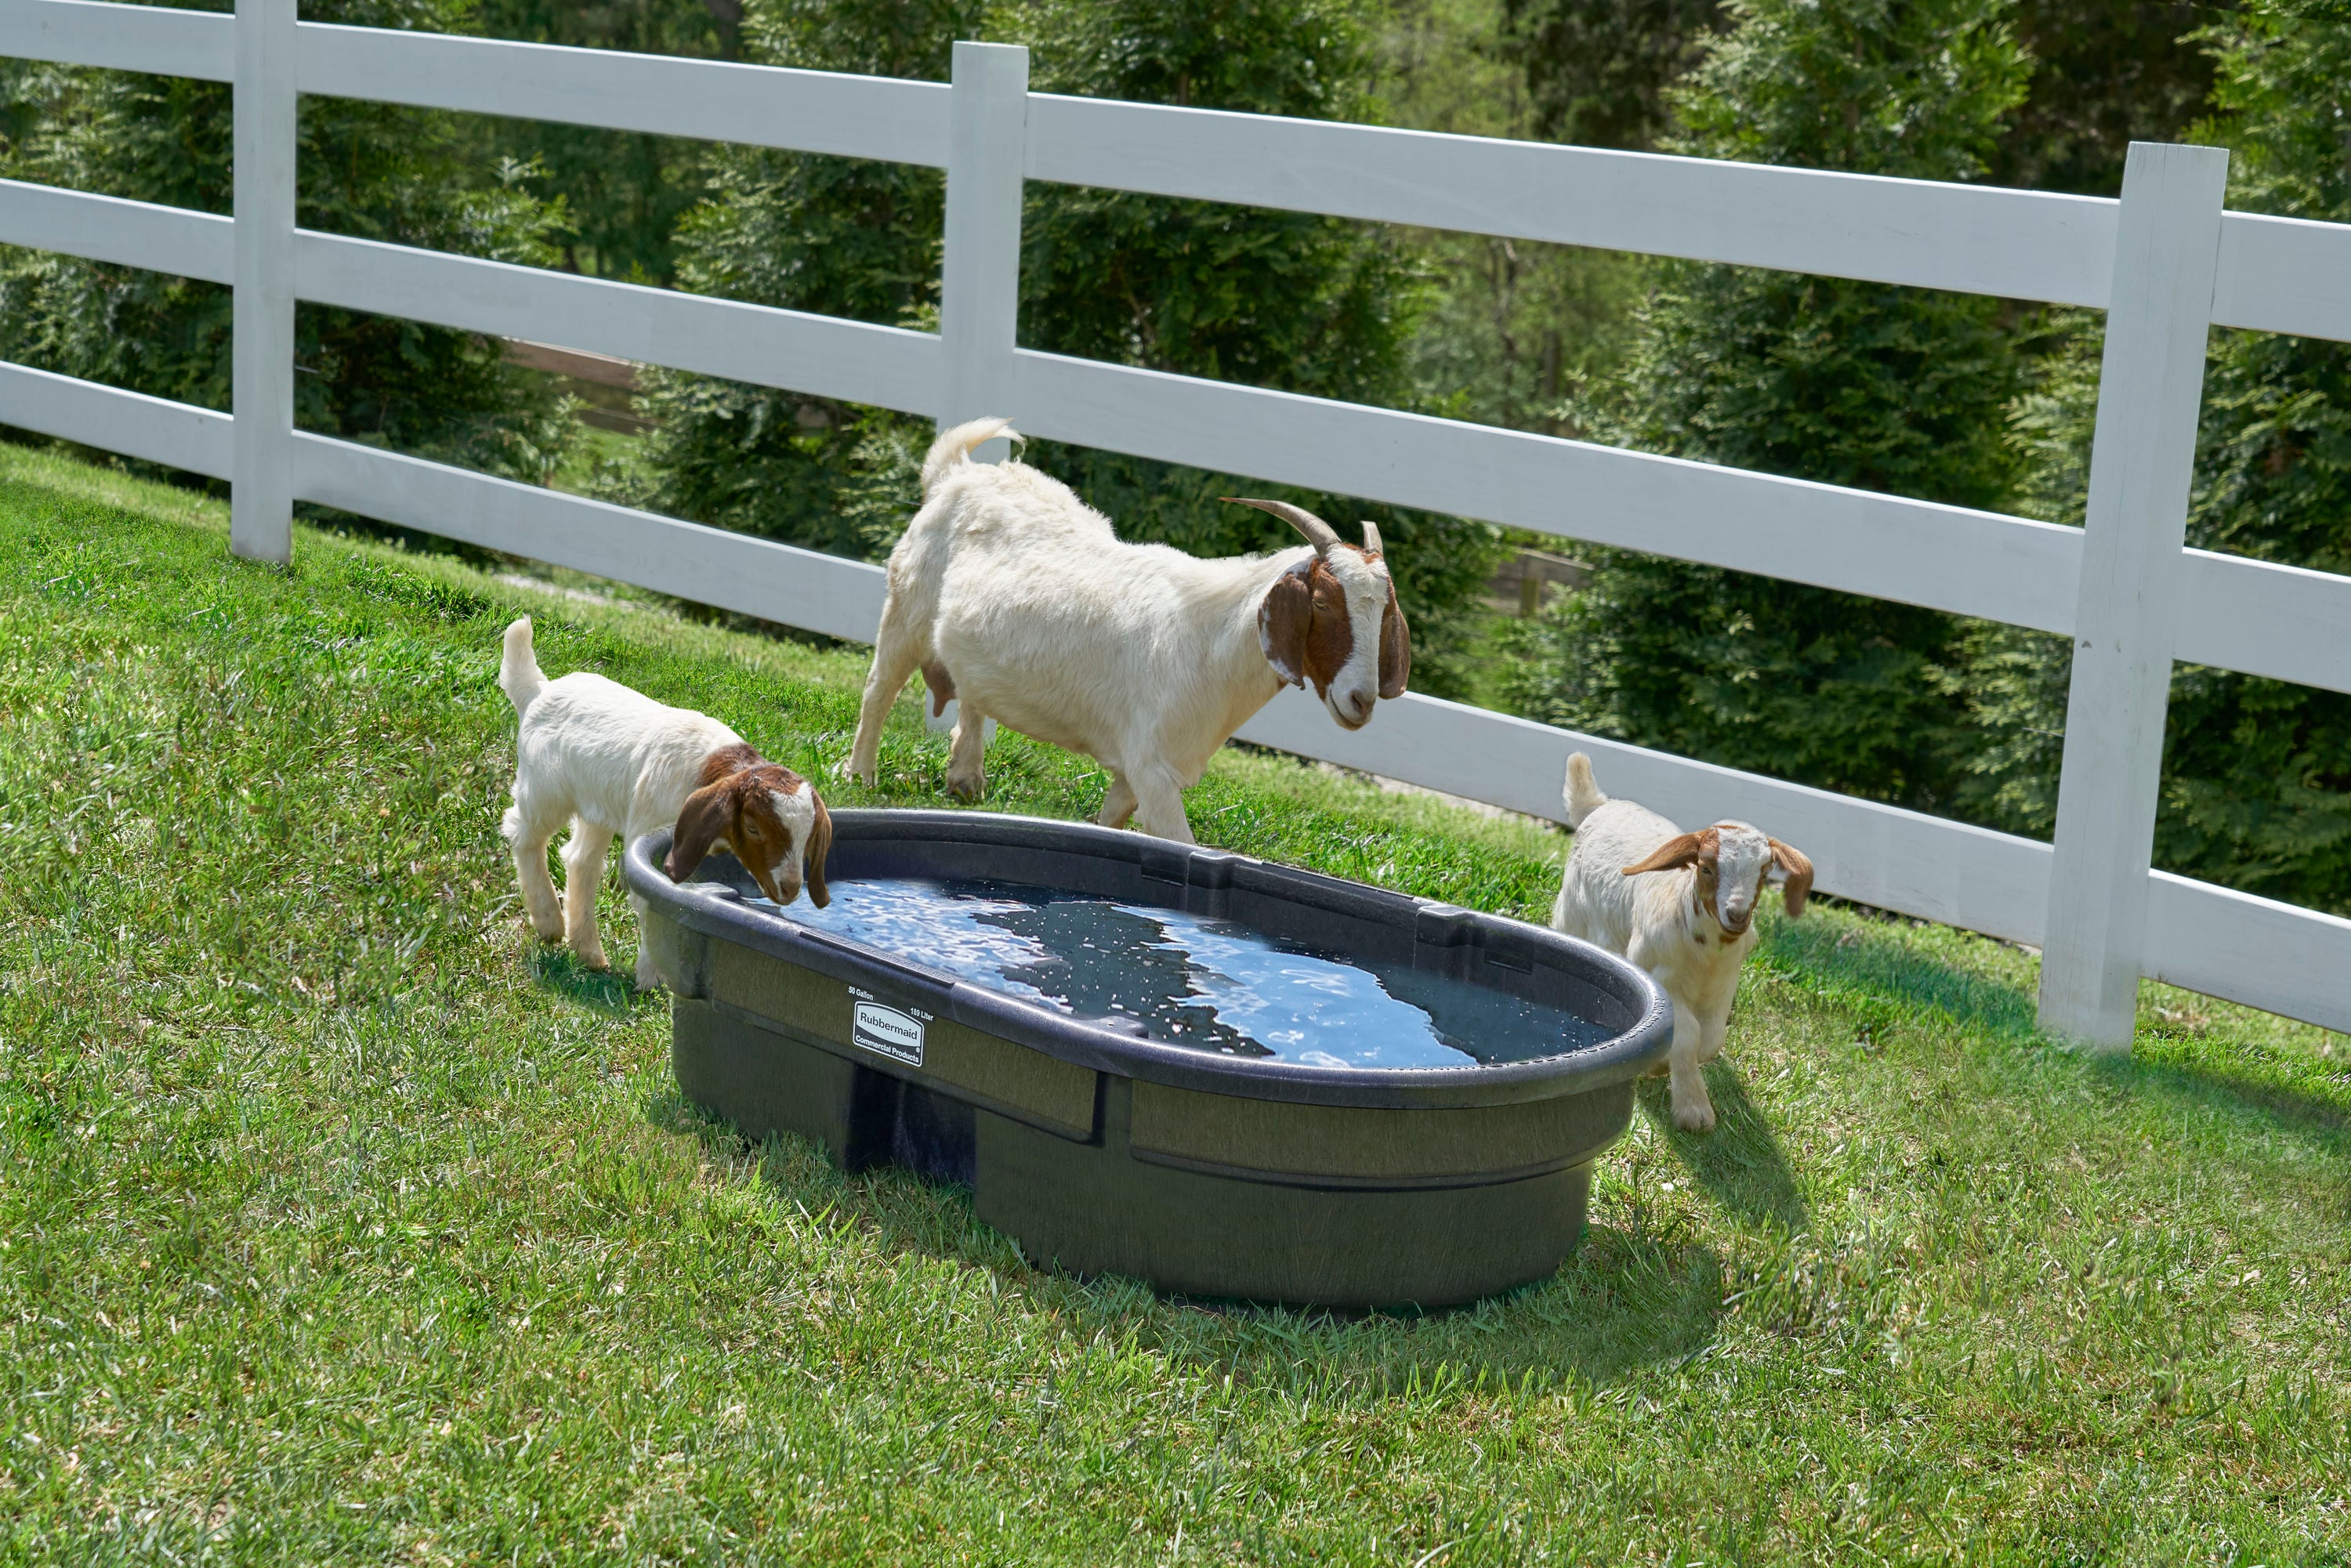 Coastal Farm & Ranch - Hot Deal Alert! Through August 17th, Save $150 on  the 300 Gallon Brute Stock Tank from Rubbermaid. The durable structural  foam resists weathering and cracking, and features